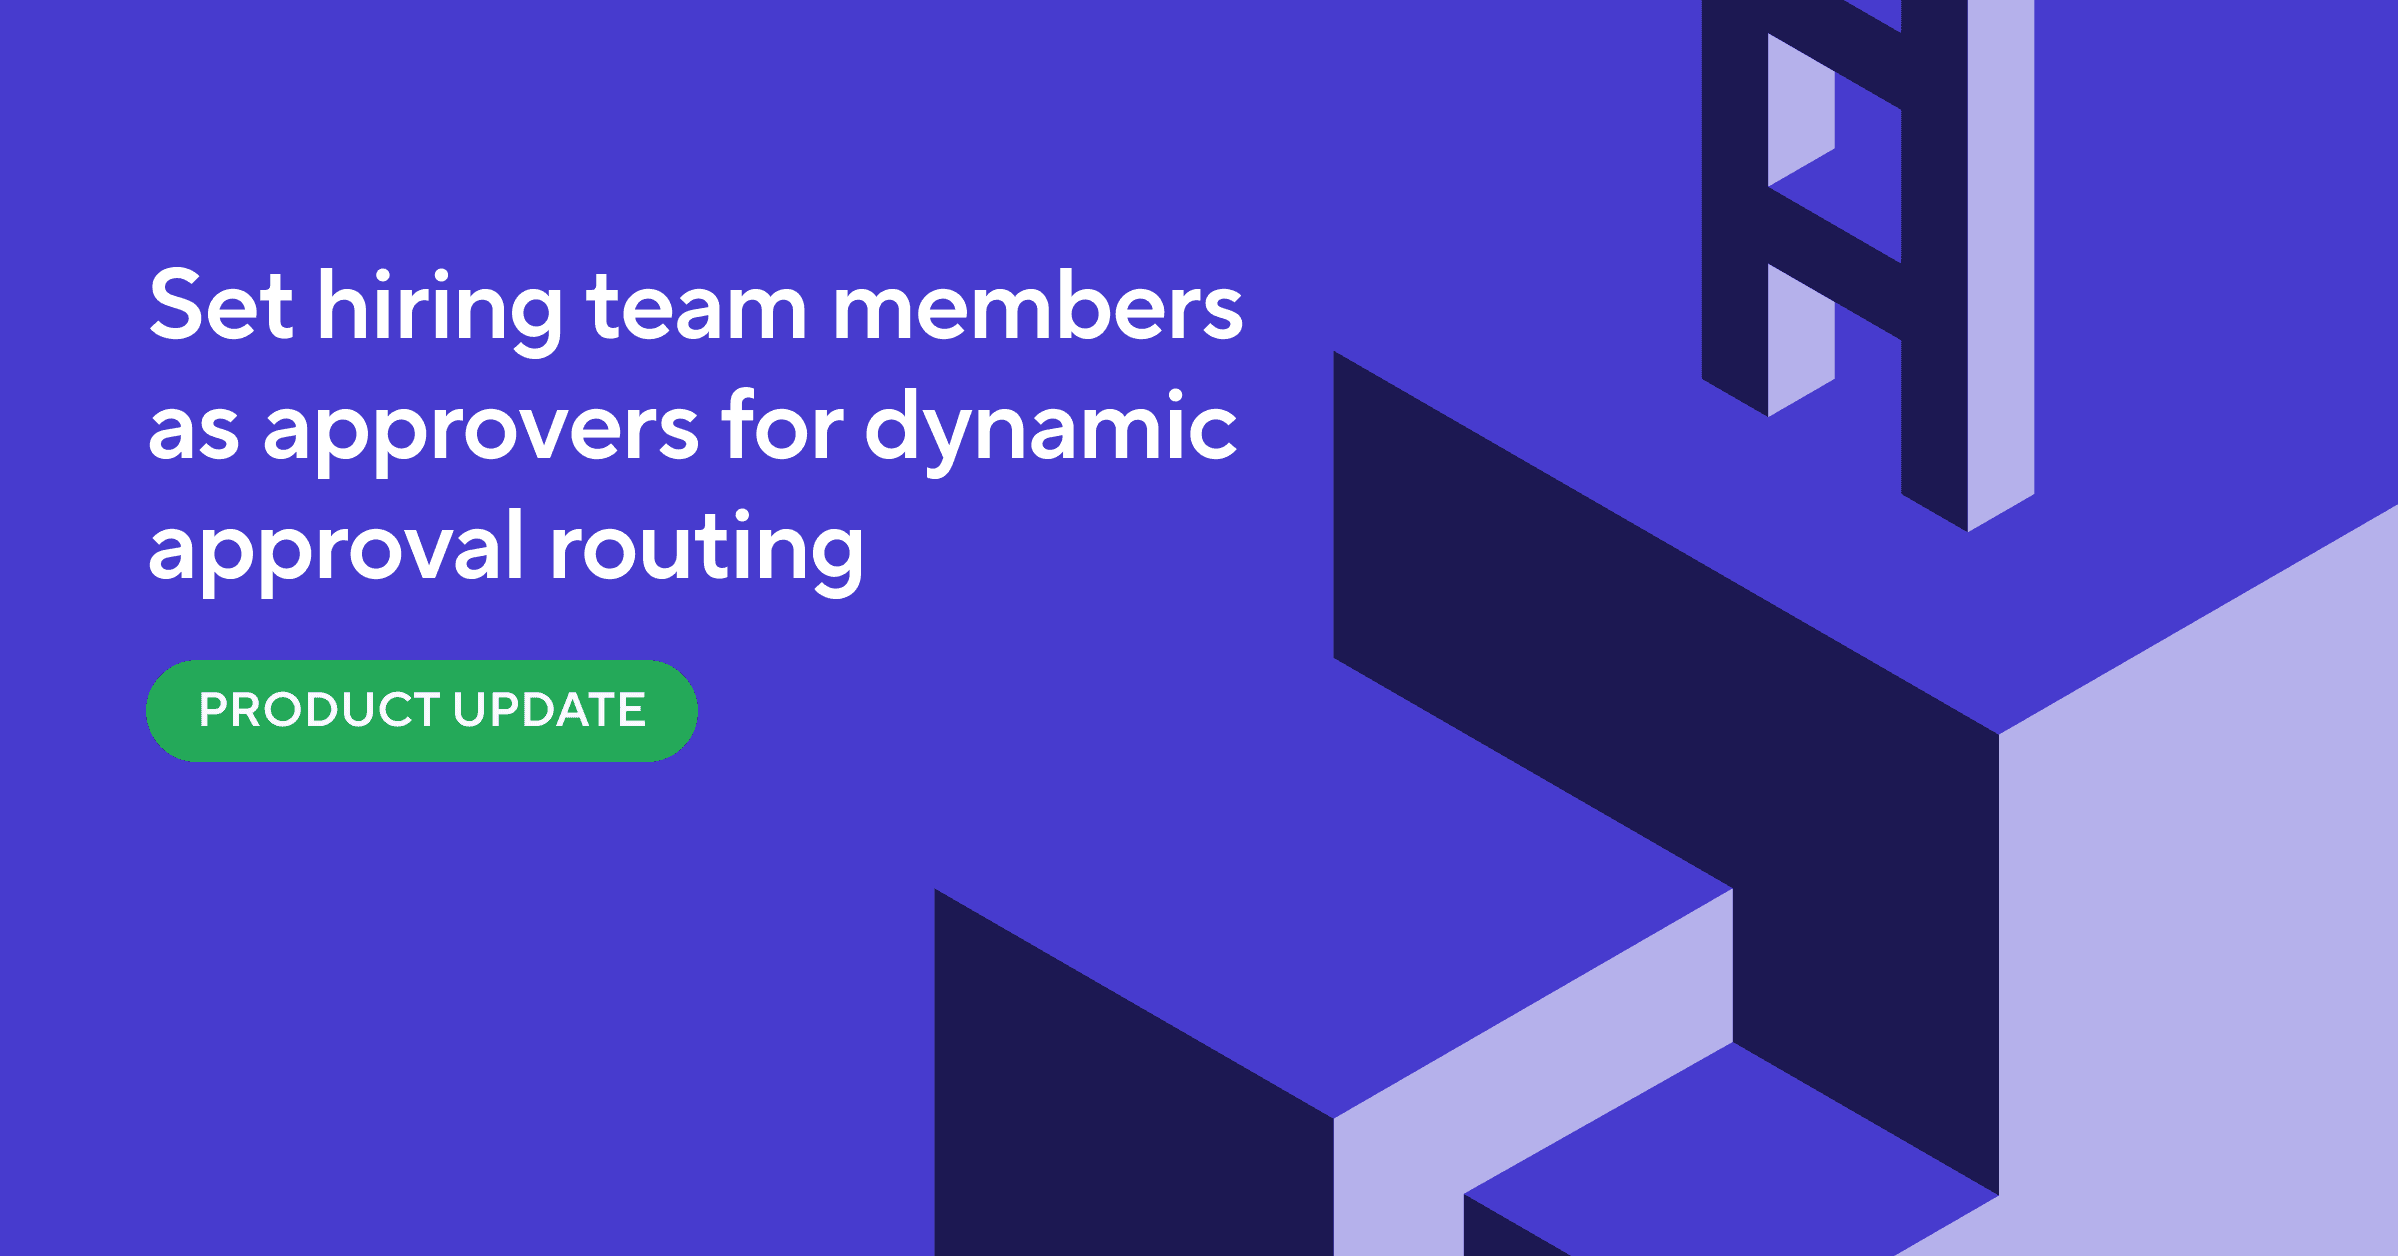 New Feature: Dynamically Set Hiring Team Members as Approvers